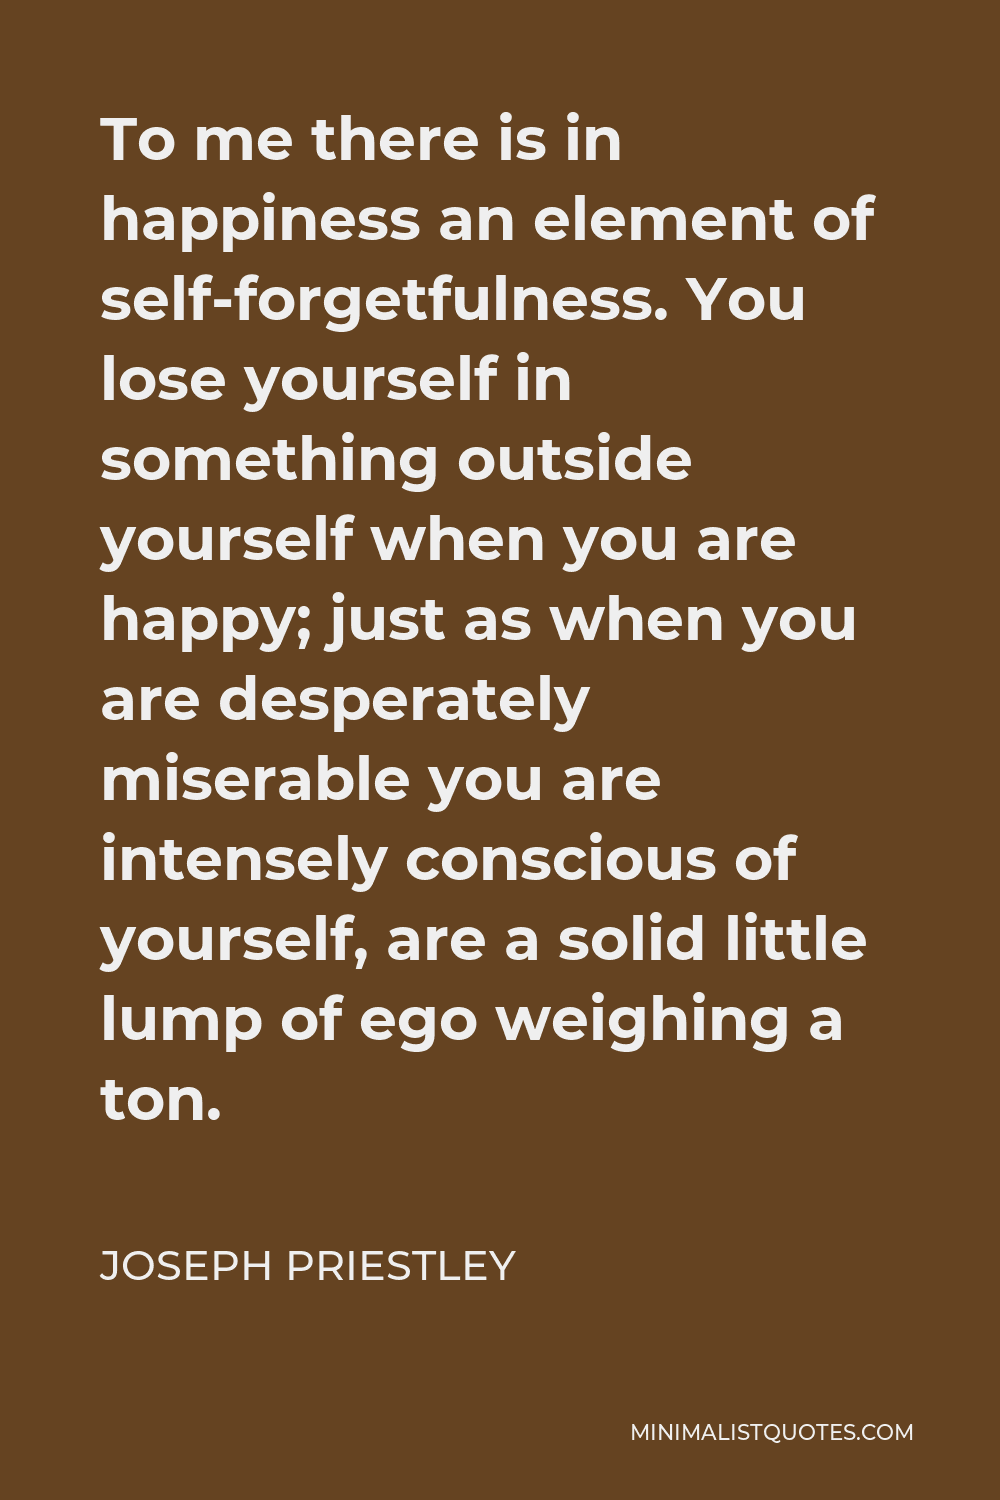 Joseph Priestley Quote - To me there is in happiness an element of self-forgetfulness. You lose yourself in something outside yourself when you are happy; just as when you are desperately miserable you are intensely conscious of yourself, are a solid little lump of ego weighing a ton.